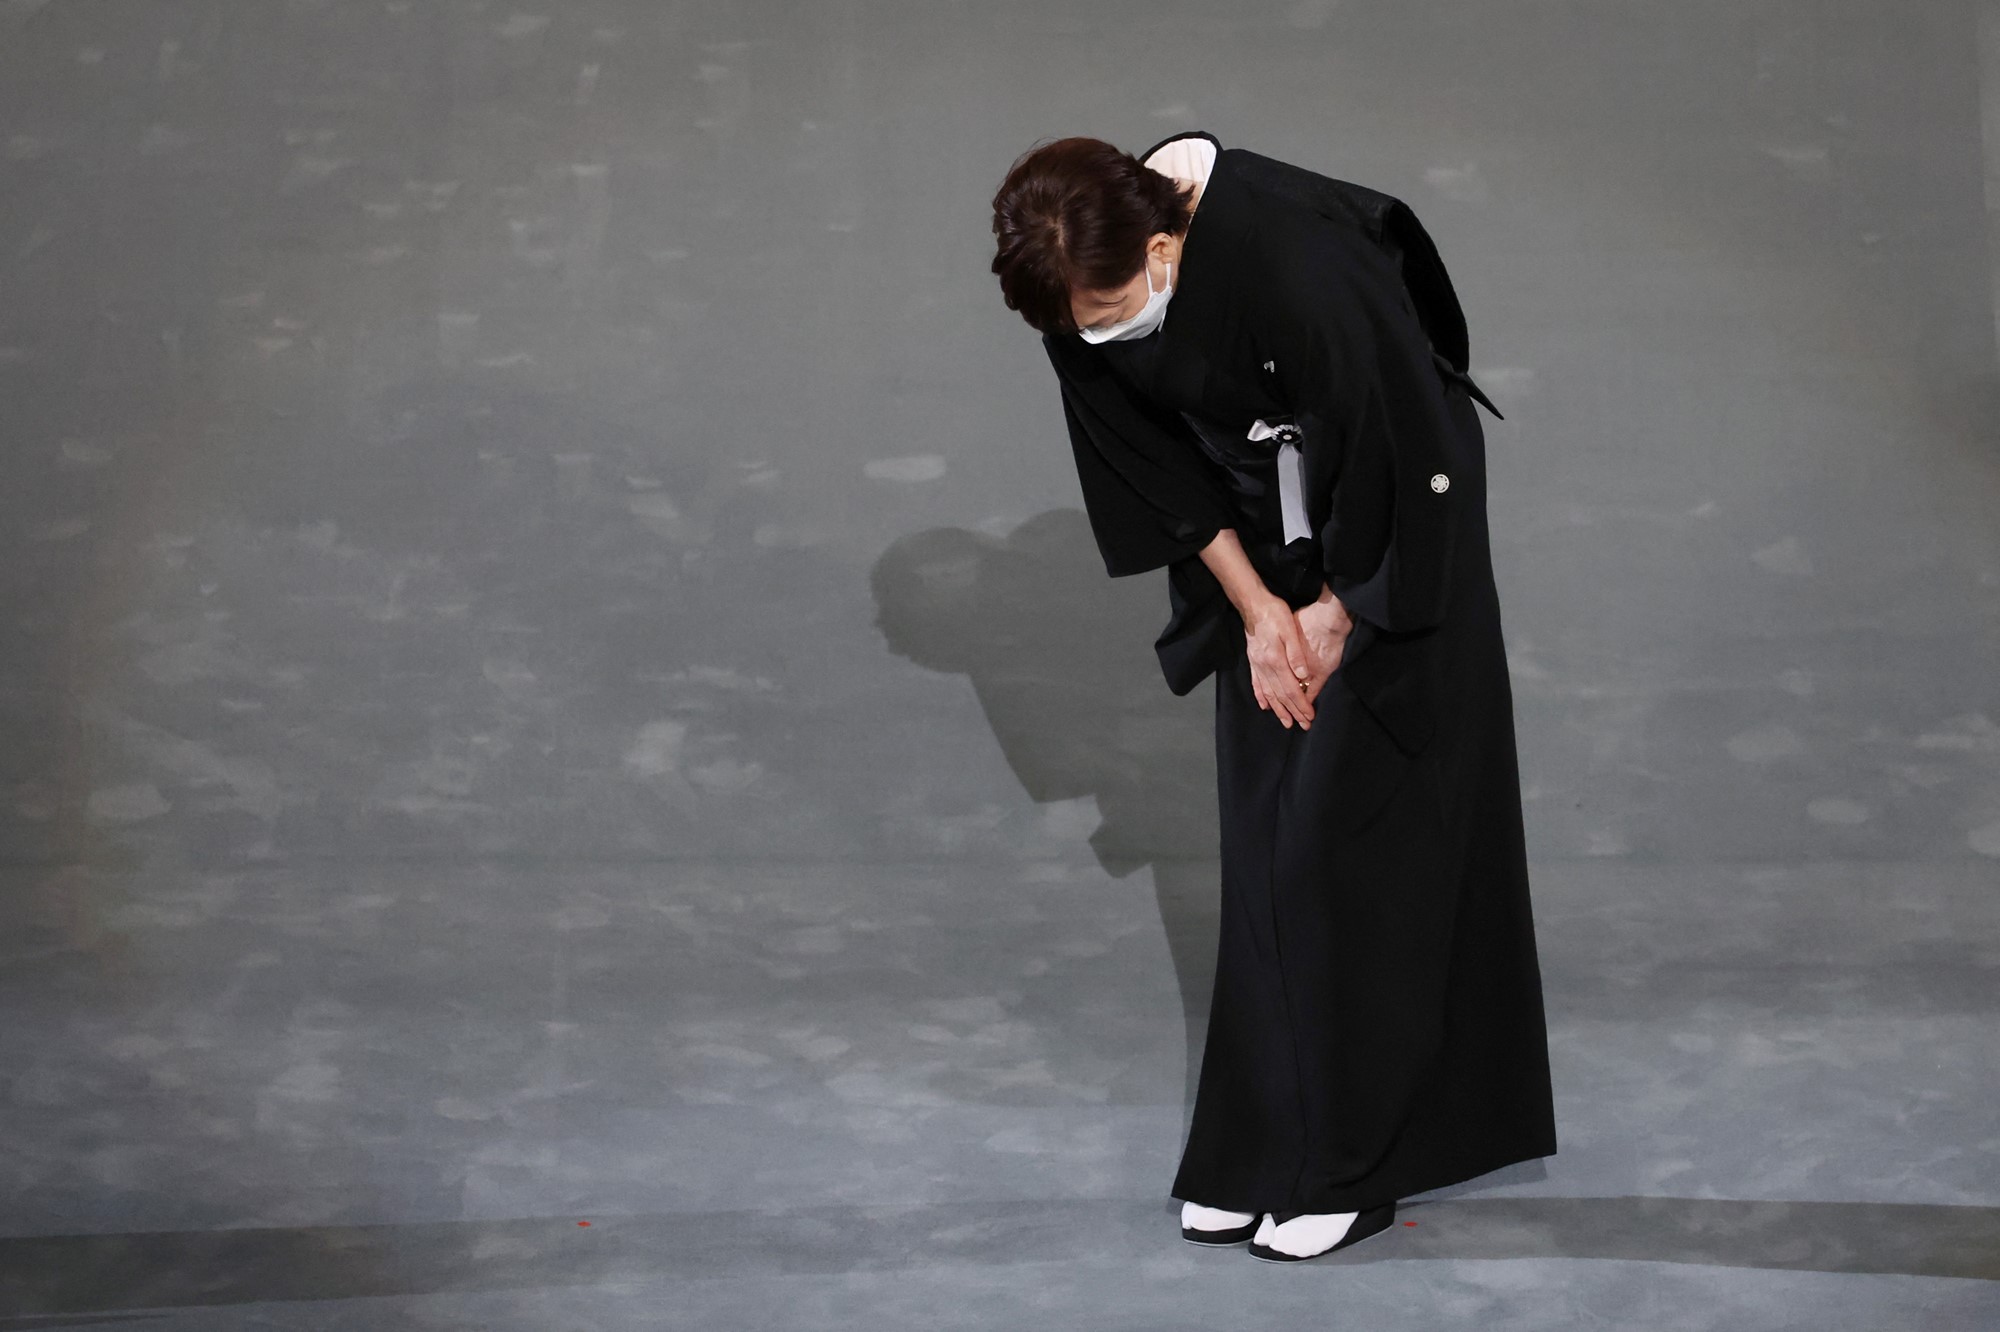 Widow of former Japanese prime minister Shinzo Abe, Akie Abe bows on stage during the state funeral for Japan's former prime minister Shinzo Abe on September 27, 2022